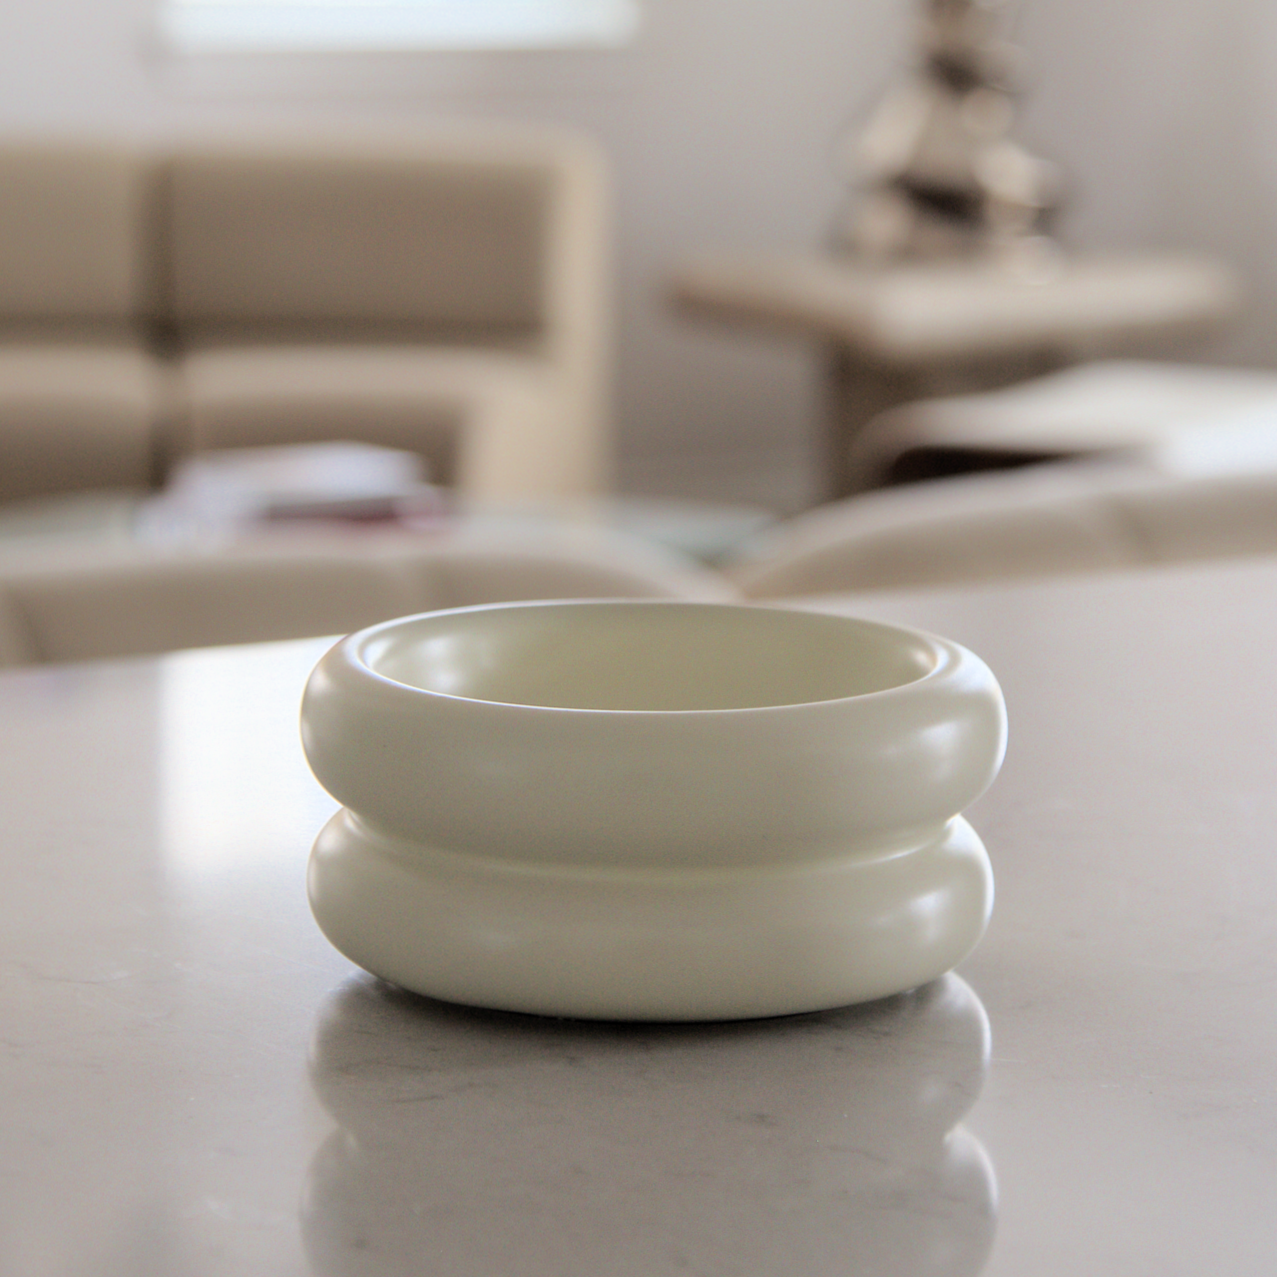 catenary elevated cat bowls in white on kitchen countertop